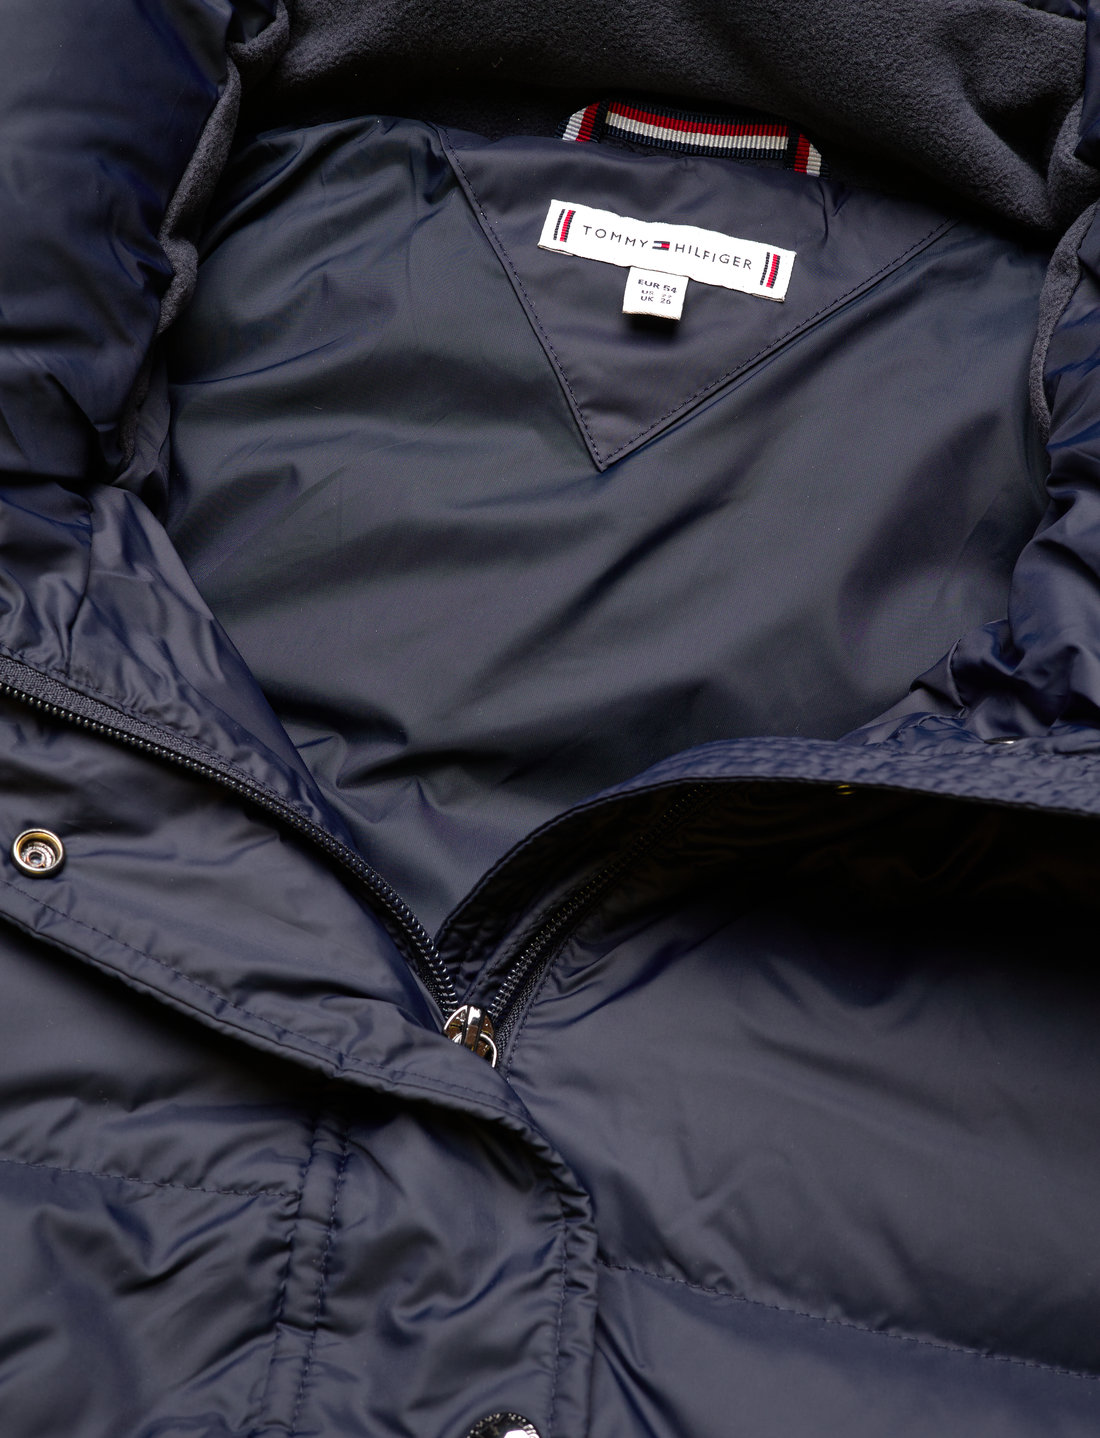 Tommy Hilfiger Crv Th Ess Tyra Down Jkt Fur - 329.90 €. Buy Padded Coats  from Tommy Hilfiger online at Boozt.com. Fast delivery and easy returns